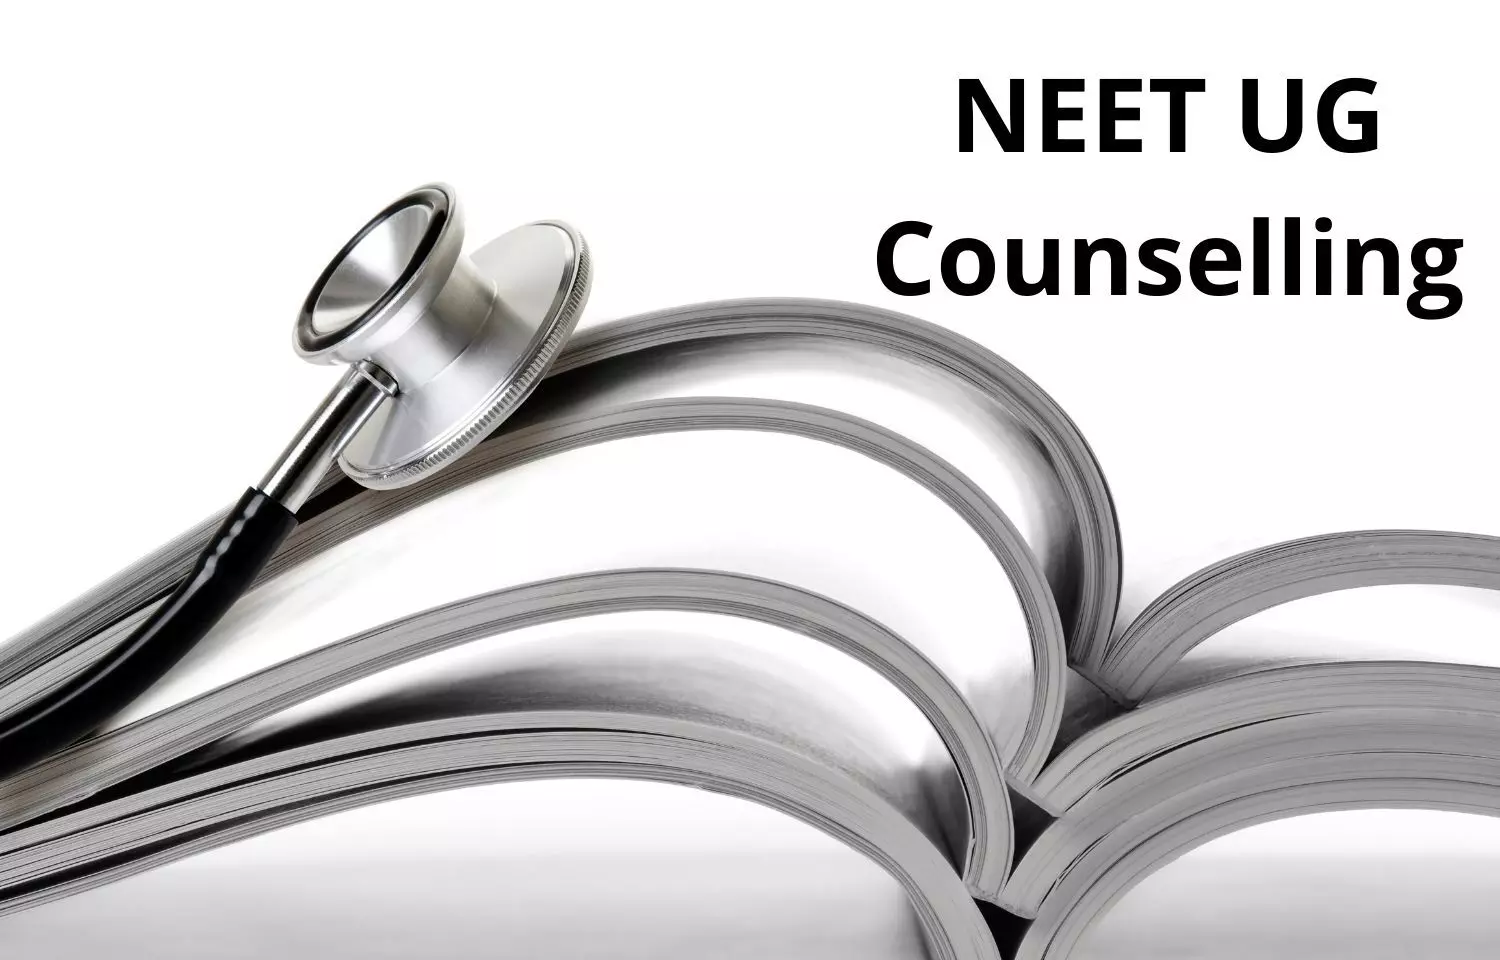 MCC Issues Notice On NRI Conversion For Round 1 NEET Counselling 2022, Details